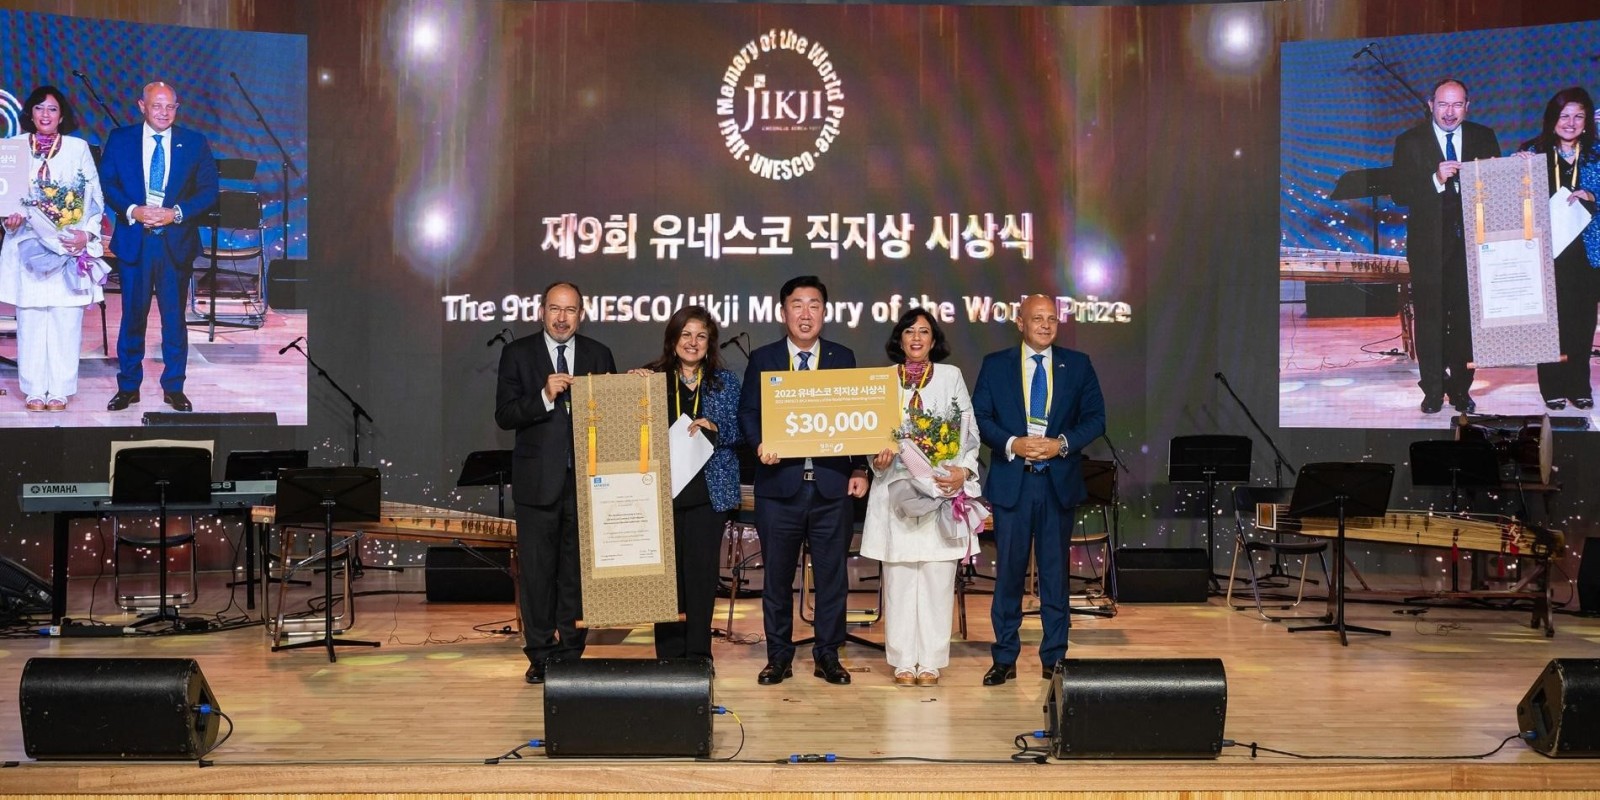 Group of people receiving award on stage